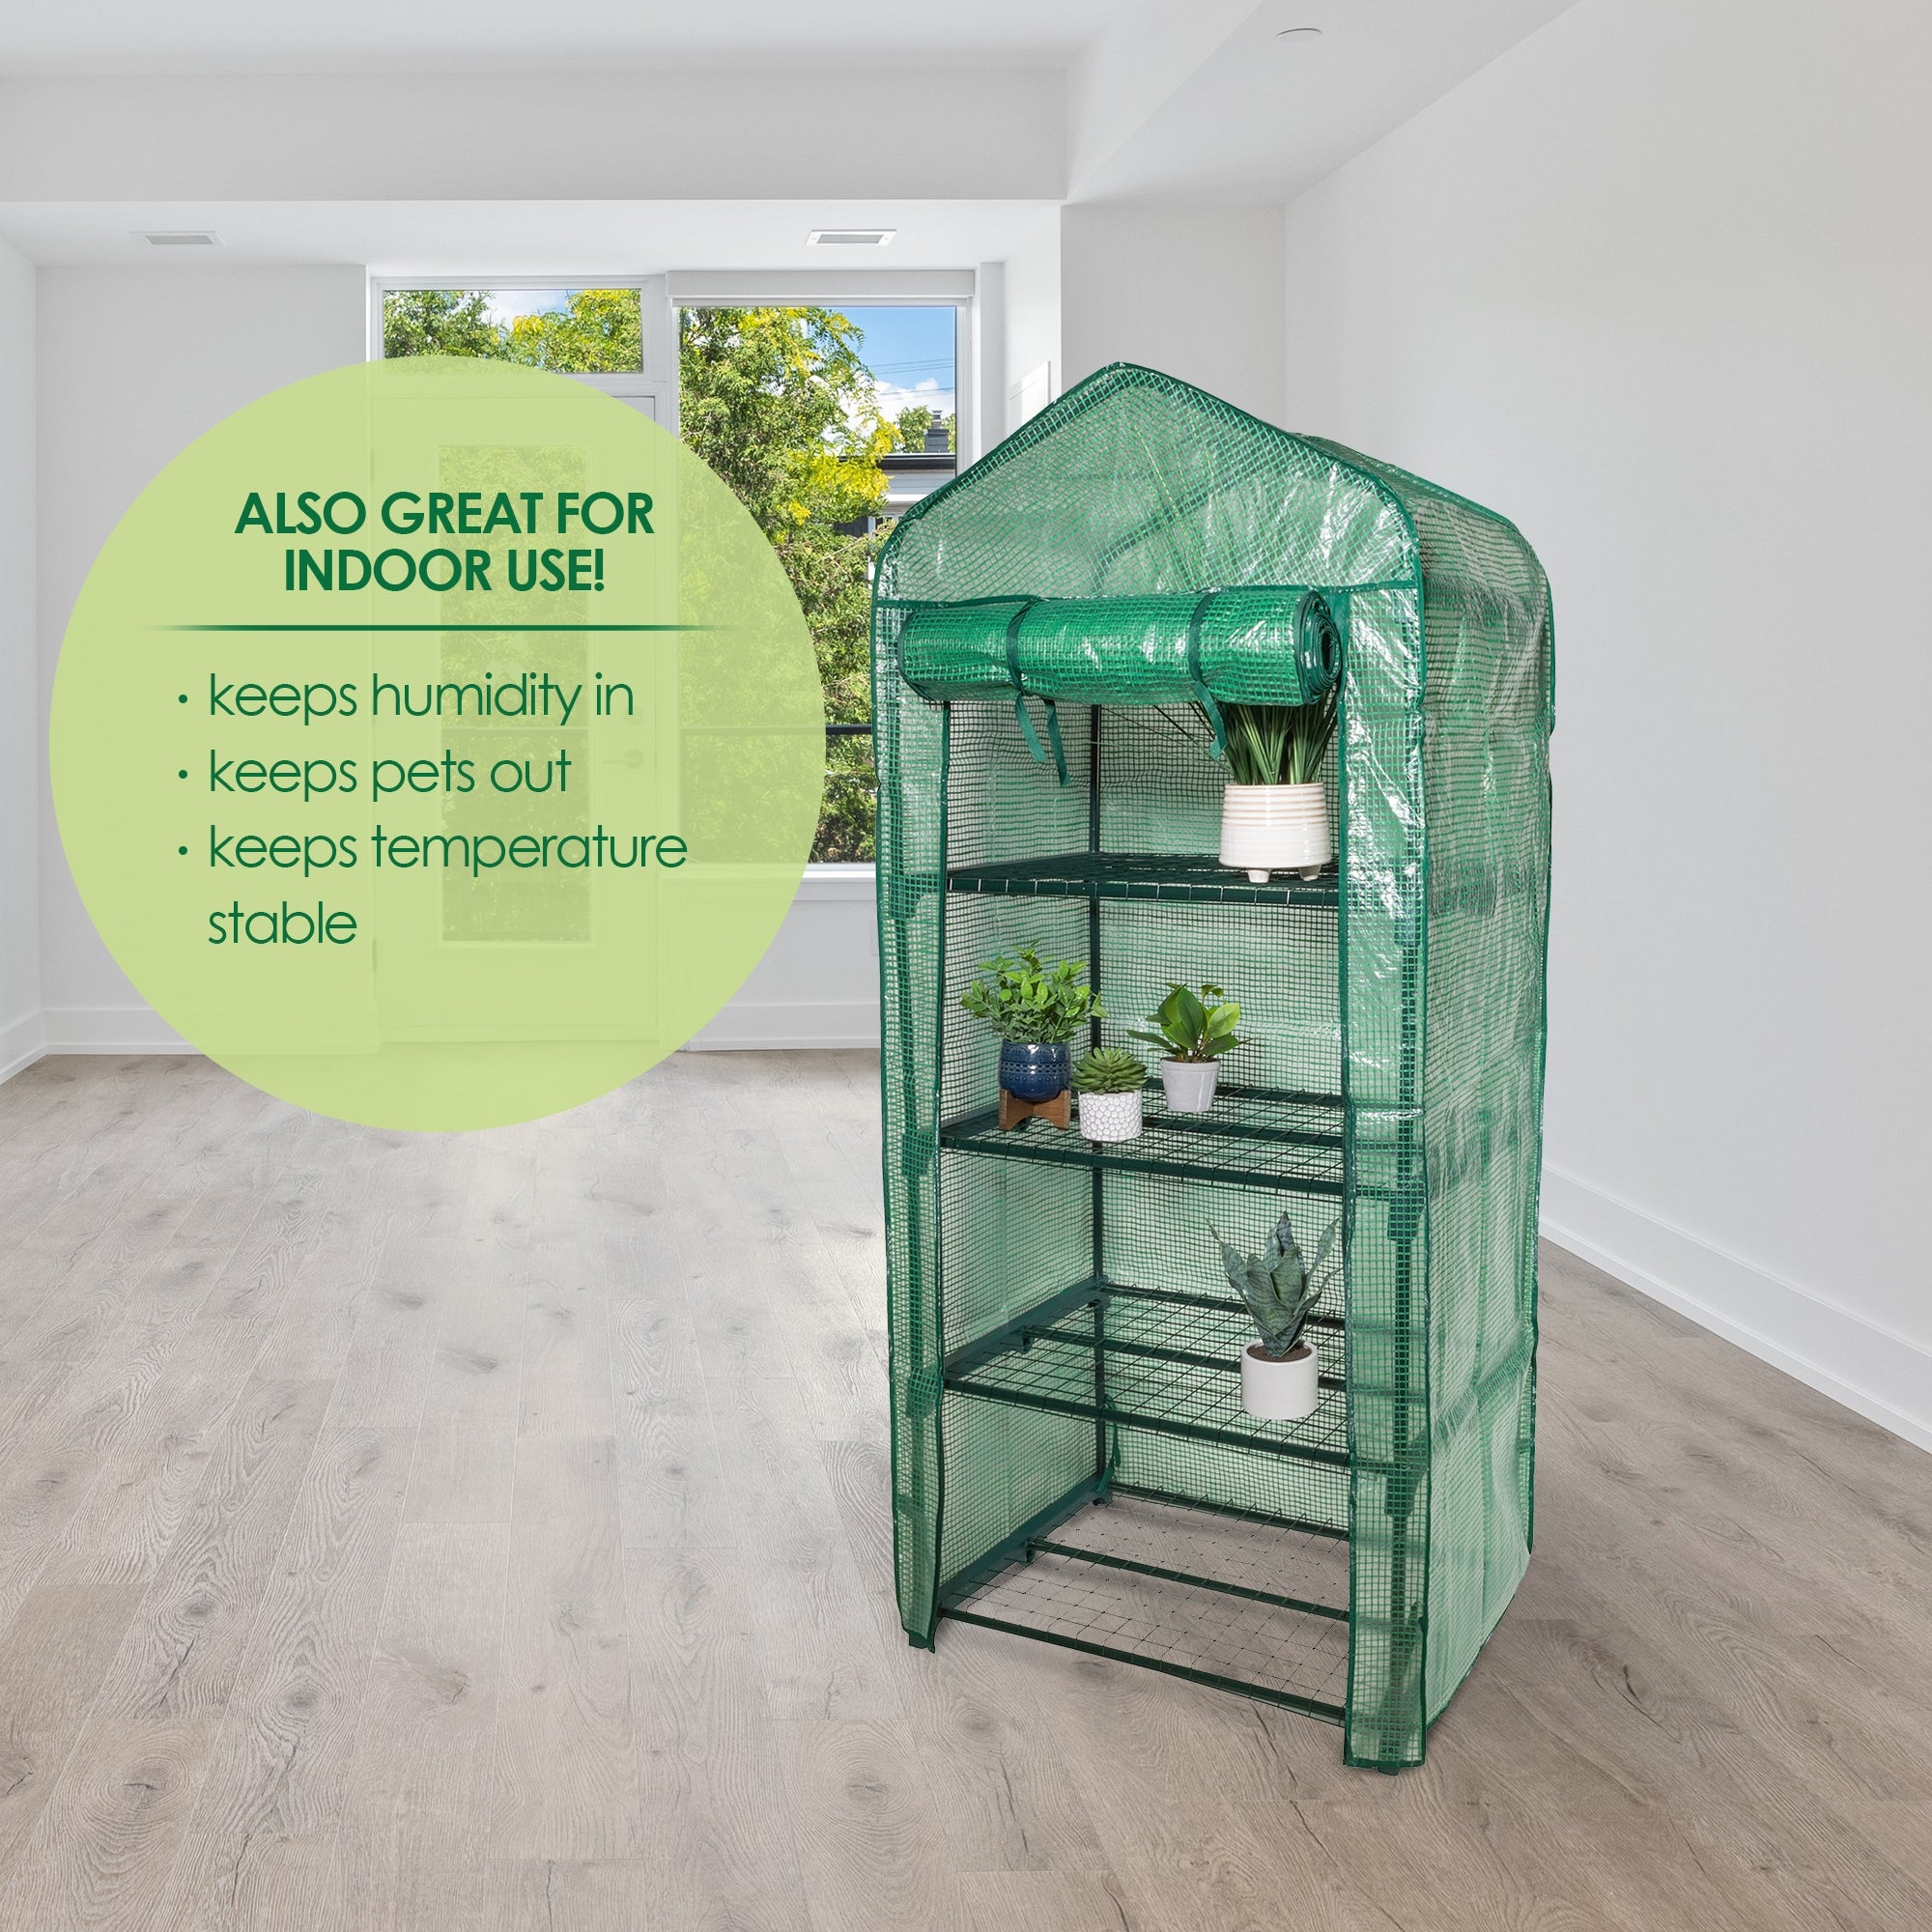 Garden Elements Personal Plastic Indoor Standing Greenhouse For Seed Starting and Propagation, Frost Protection, Green, Small, 27" x 19" x 62"